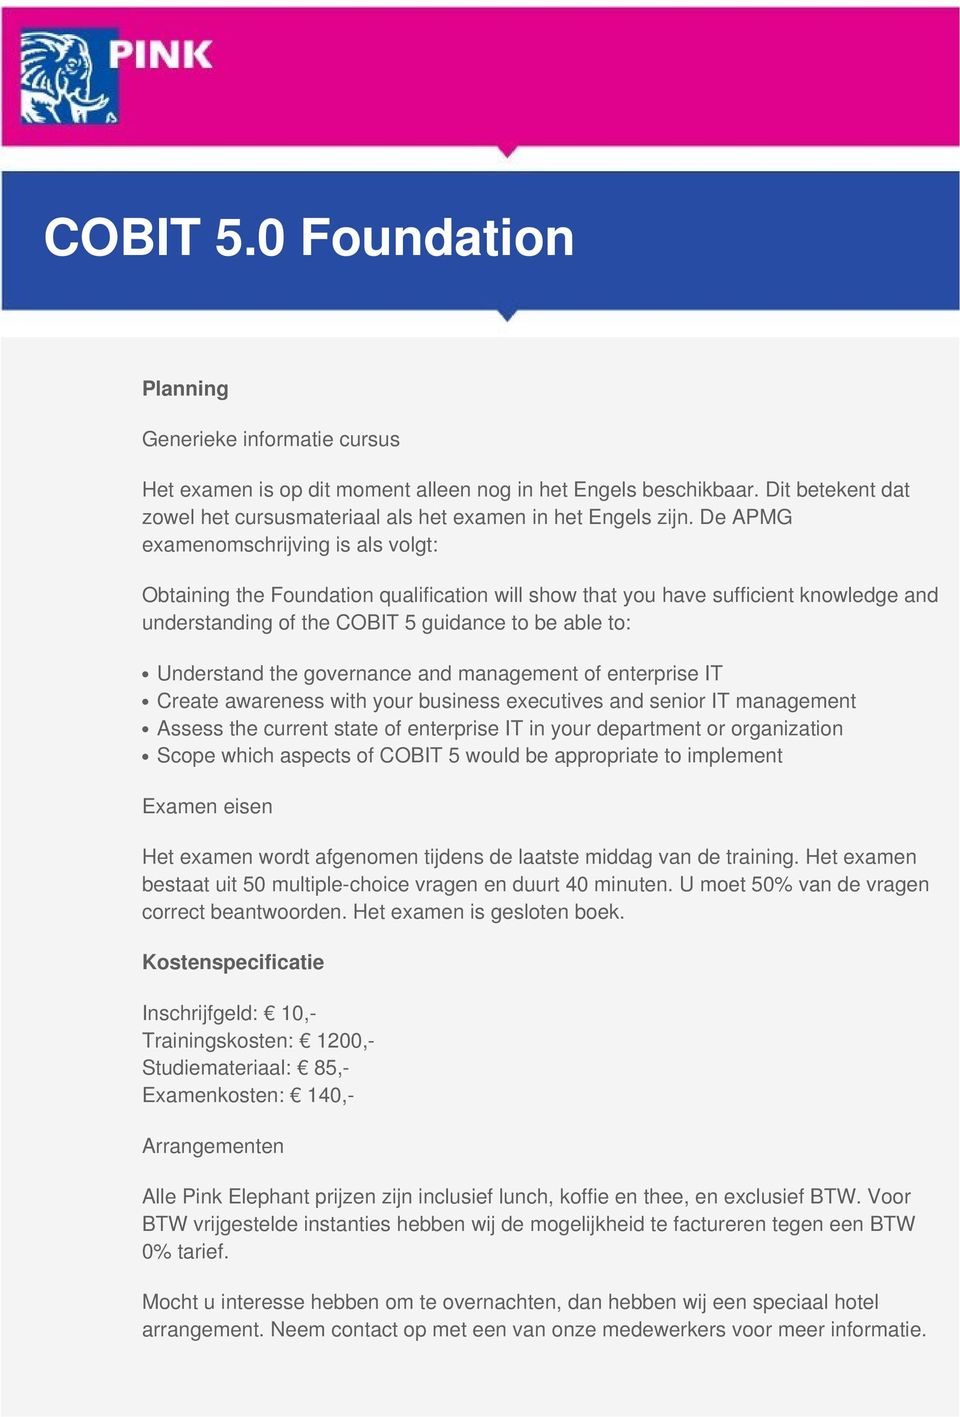 De APMG examenomschrijving is als volgt: Obtaining the Foundation qualification will show that you have sufficient knowledge and understanding of the COBIT 5 guidance to be able to: Understand the